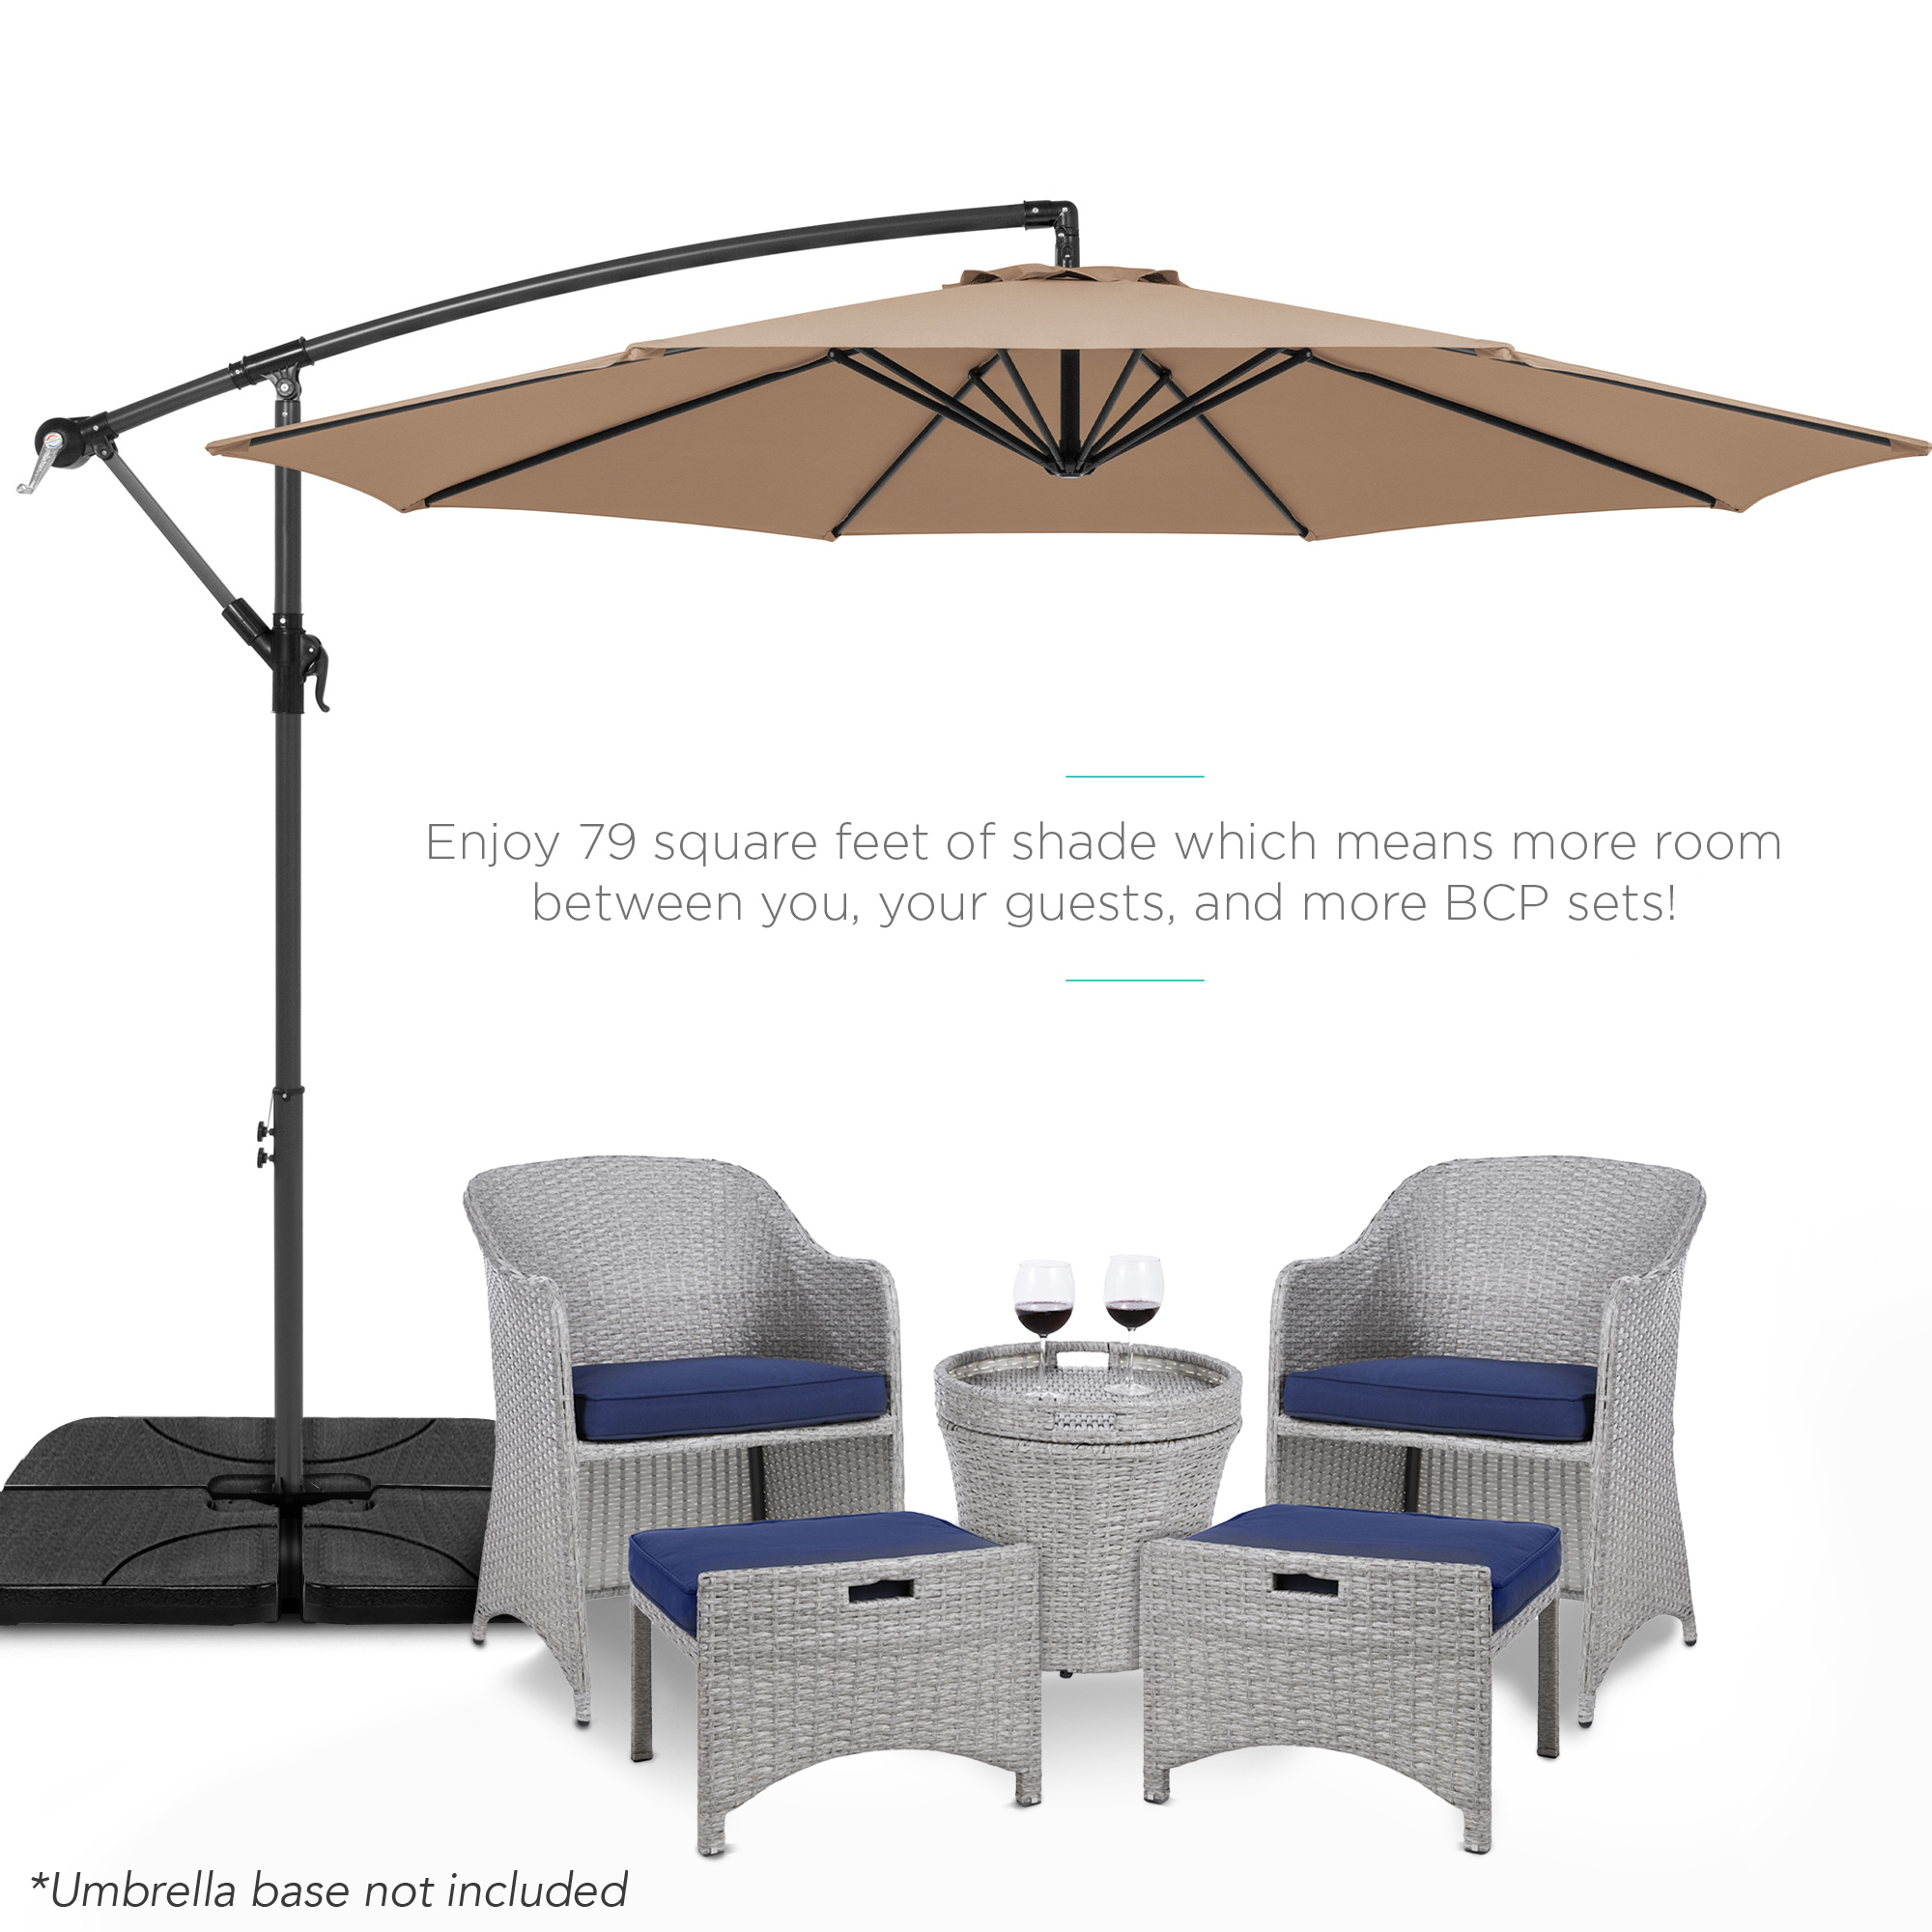 Best Choice Products 10ft Offset Hanging Outdoor Market Patio Umbrella w/ Easy Tilt Adjustment - Tan - image 2 of 7